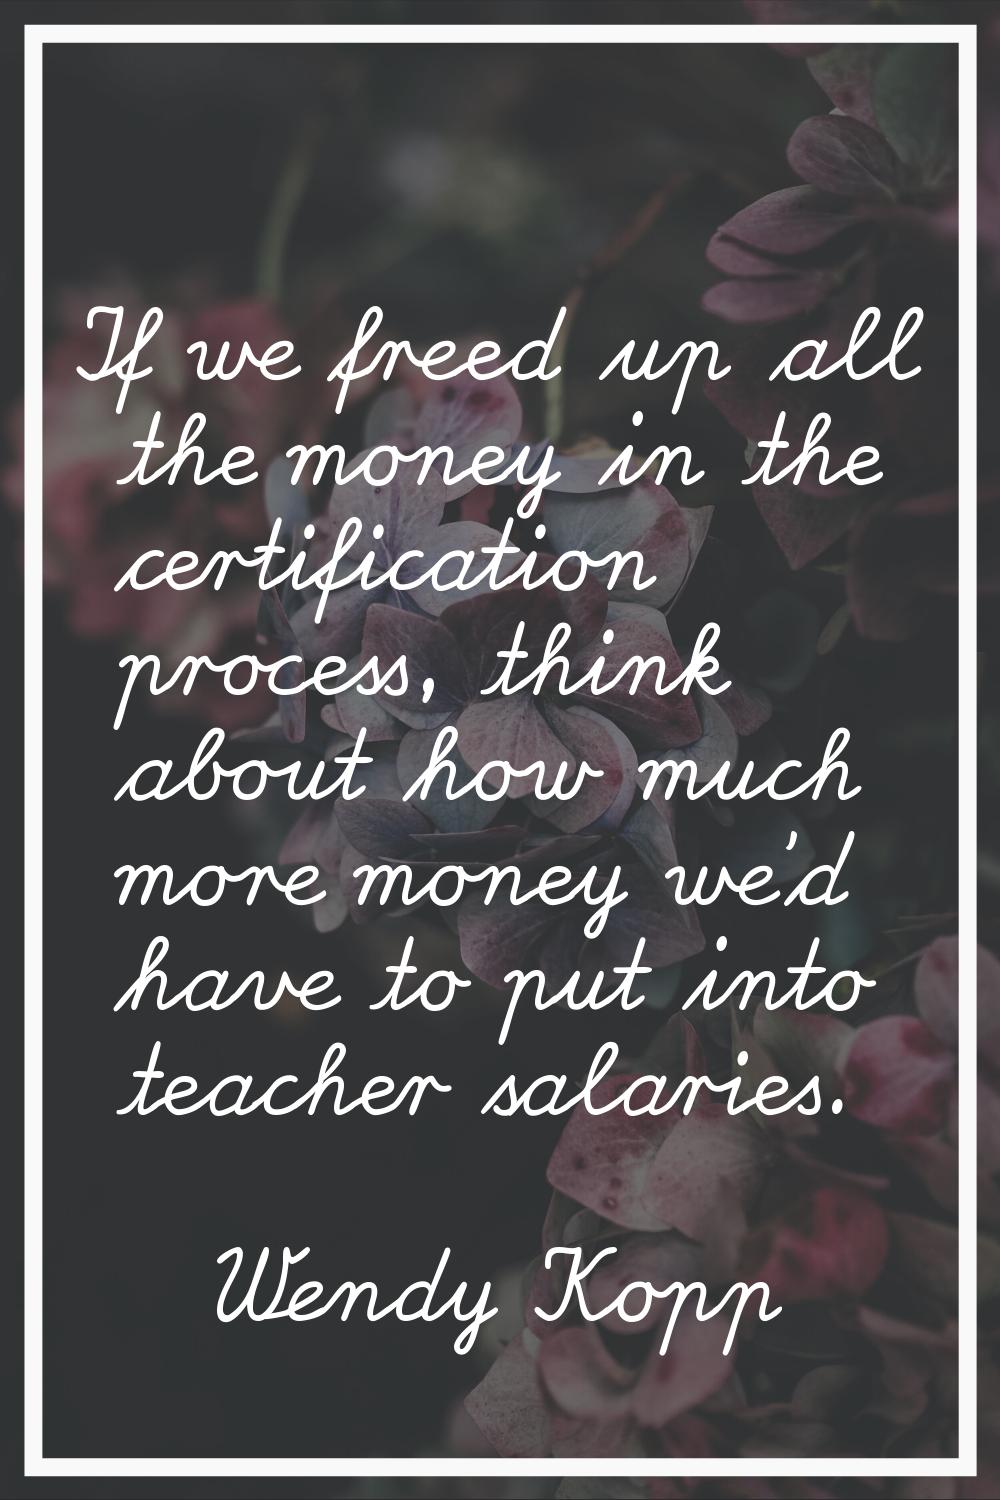 If we freed up all the money in the certification process, think about how much more money we'd hav